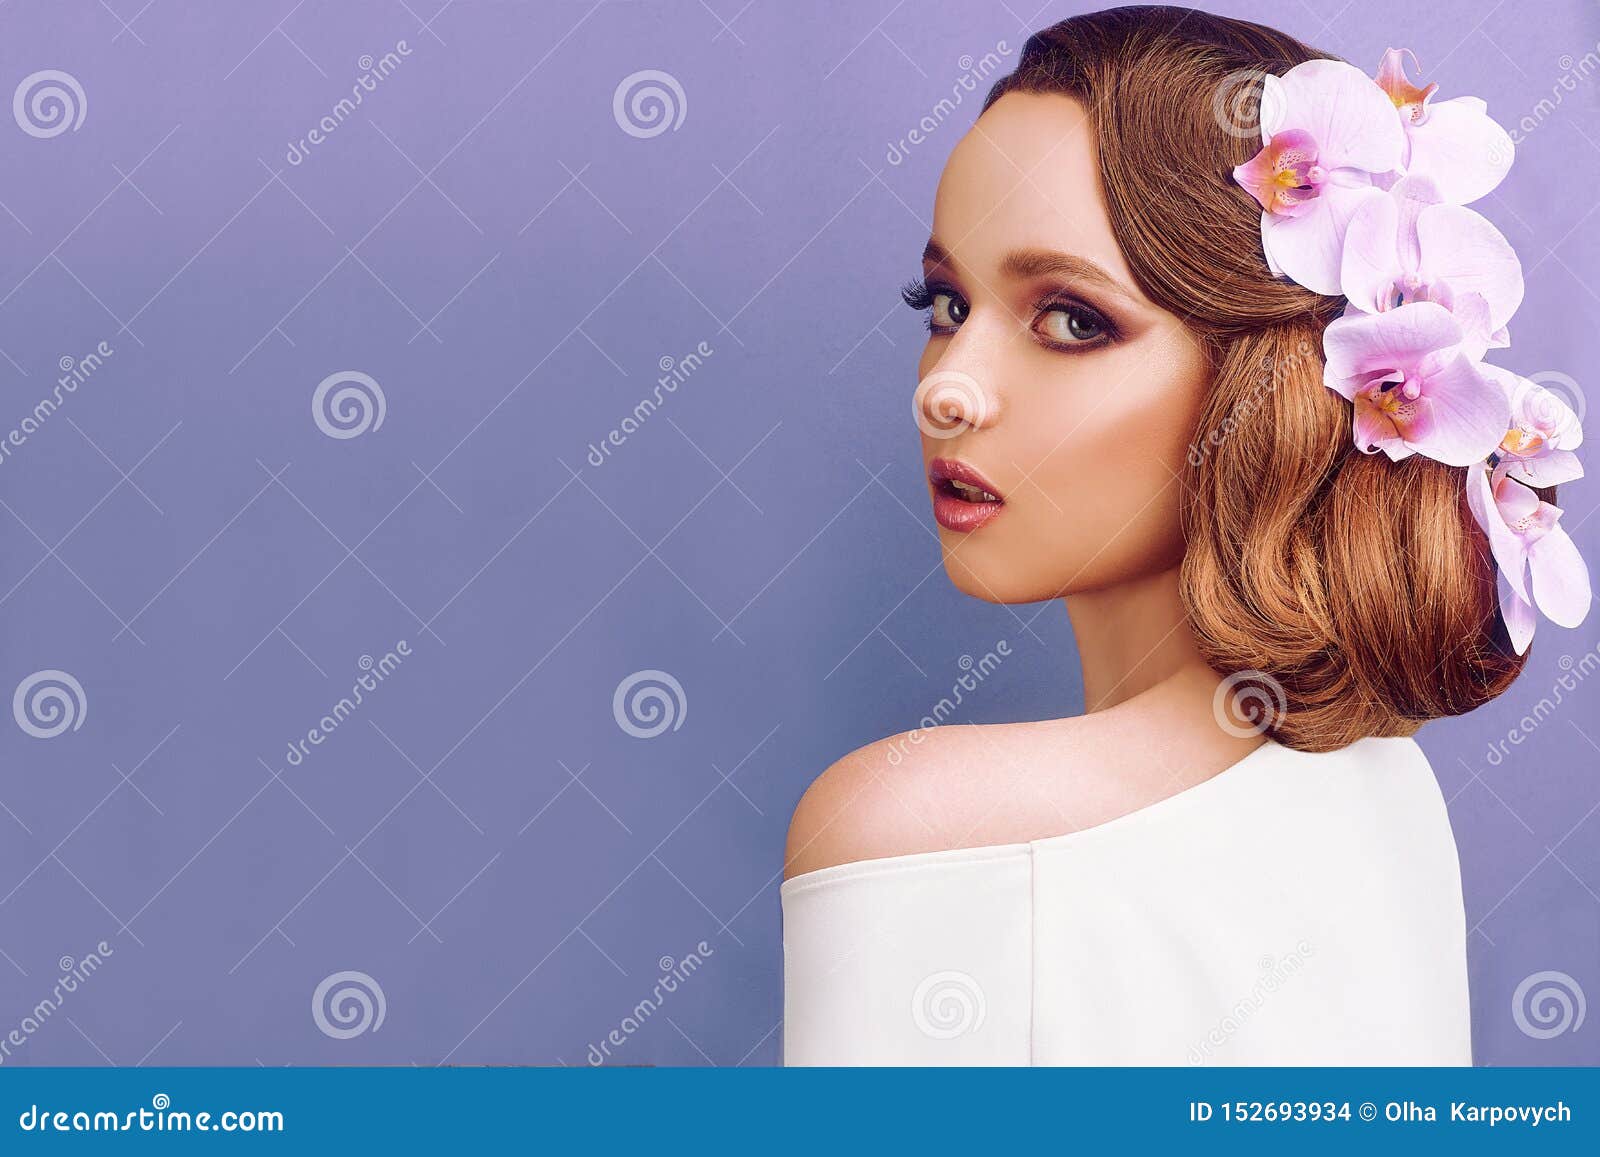 Brunette on a Blue Background. Girl with Professional Wedding Make-up and  Hairstyle. Beauty Salon Stock Photo - Image of femininity, bride: 152693934